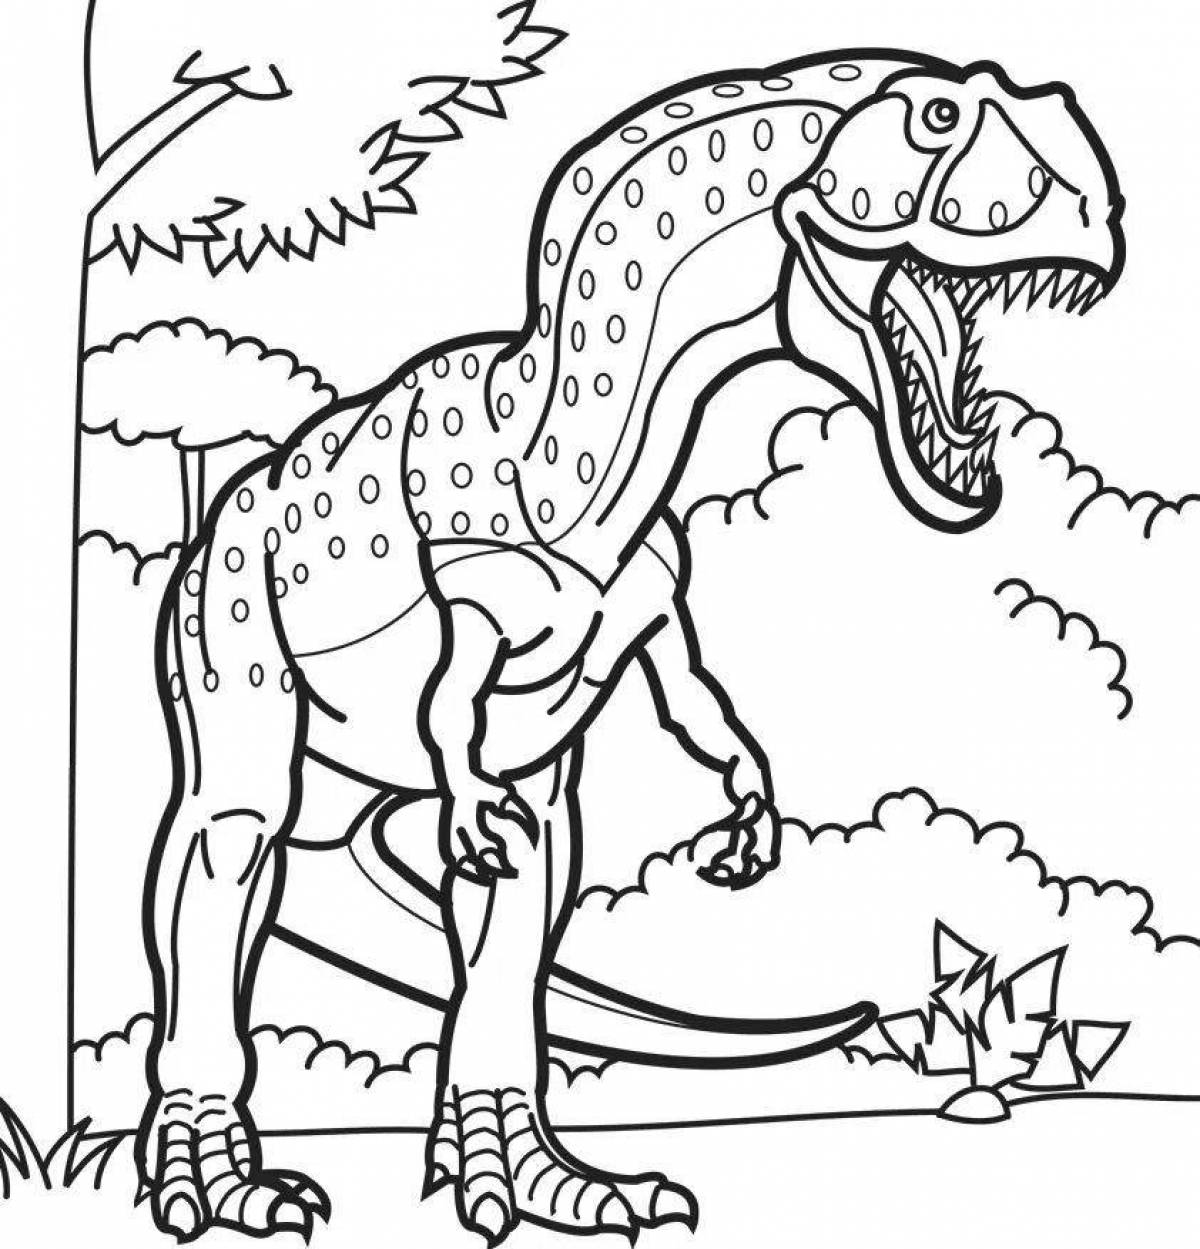 Dinosaur fun coloring book for 6-7 year olds